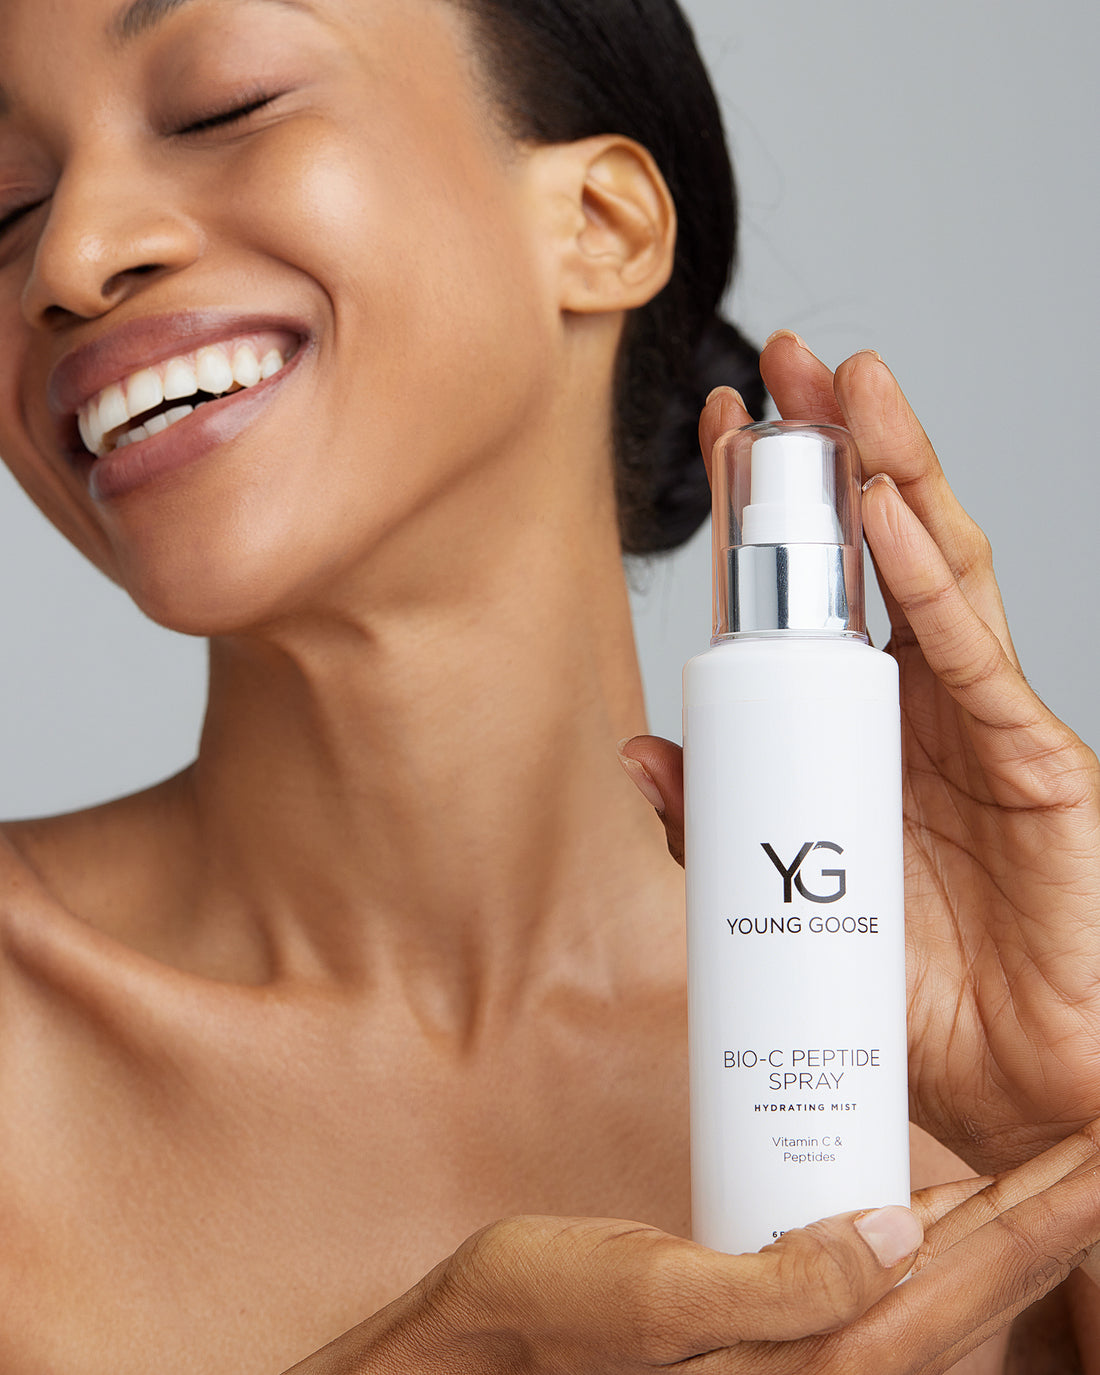 Young Goose Bio-C Peptide Spray - Hydrating and Toning Mist